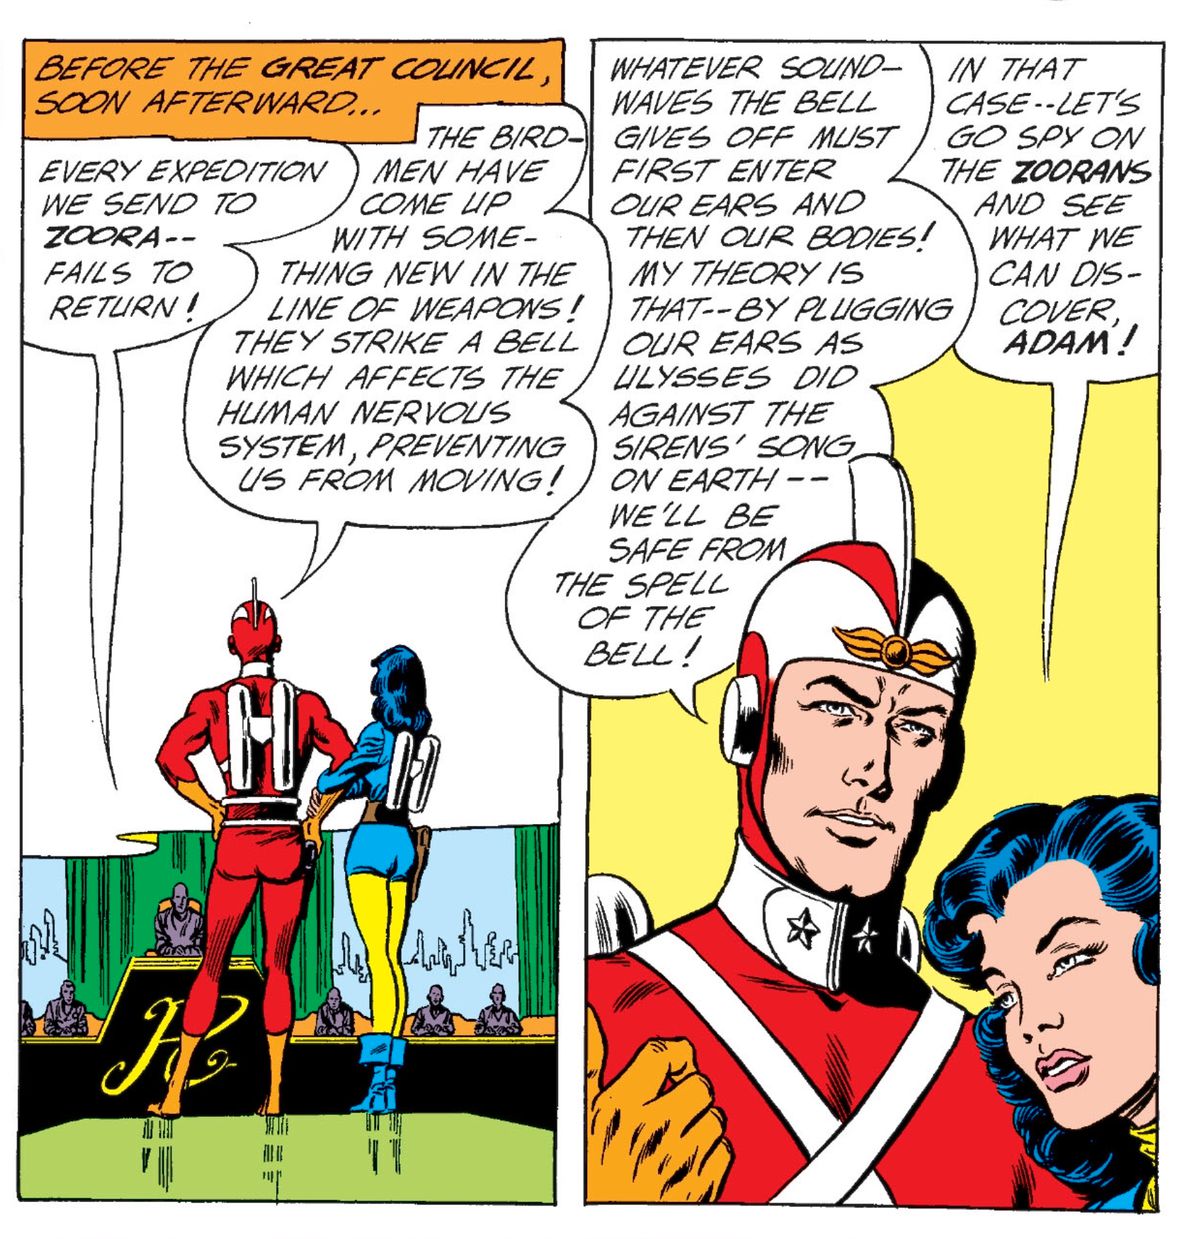 Adam Strange and Alanna confer with the Great Council of Rann on what to do about some bird-men who have learned the power of mind control, in Mystery in Space #75, DC Comics (1962).